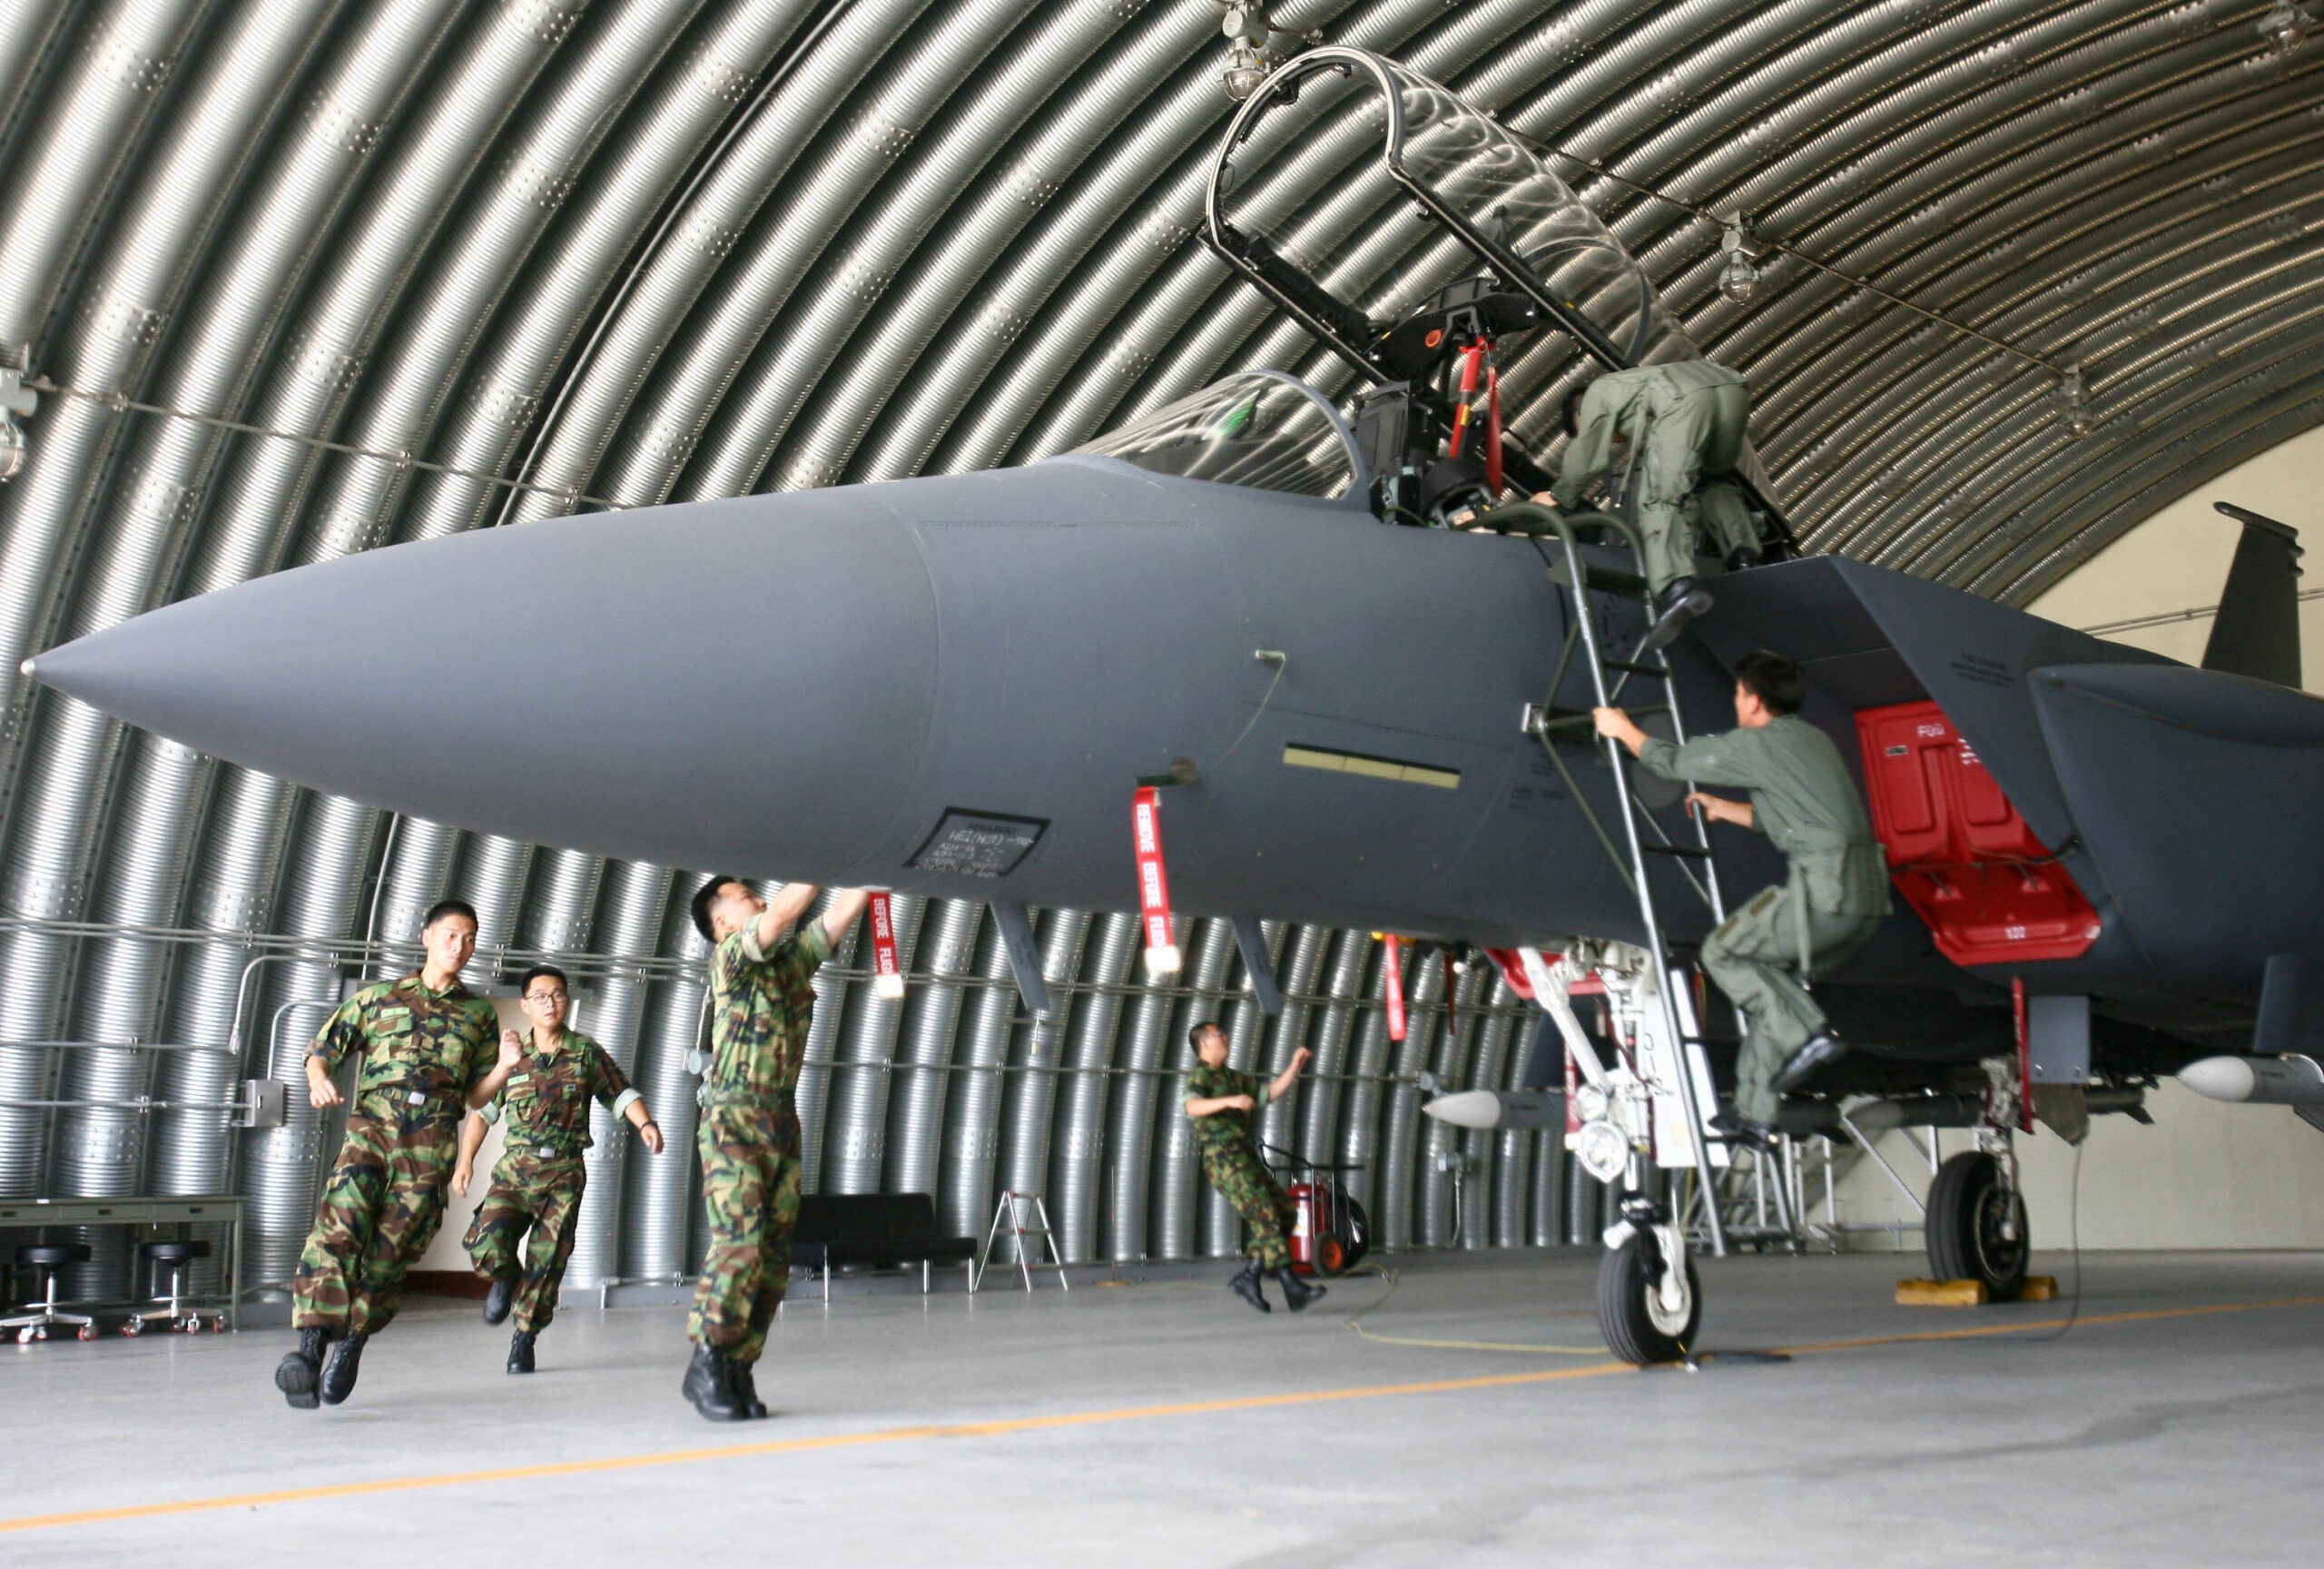 South Korean air force maintenance staff check an F-15K fighter jet in an air base in the southern city of Daegu before its first deployment for combat operations on July 10, 2008. The deployment follows a period of pilot training and familiarisation since the air force began operating the planes in late 2005. AFP PHOTO/WON DAI-YEON (Photo credit should read WON DAI-YEON/AFP via Getty Images)